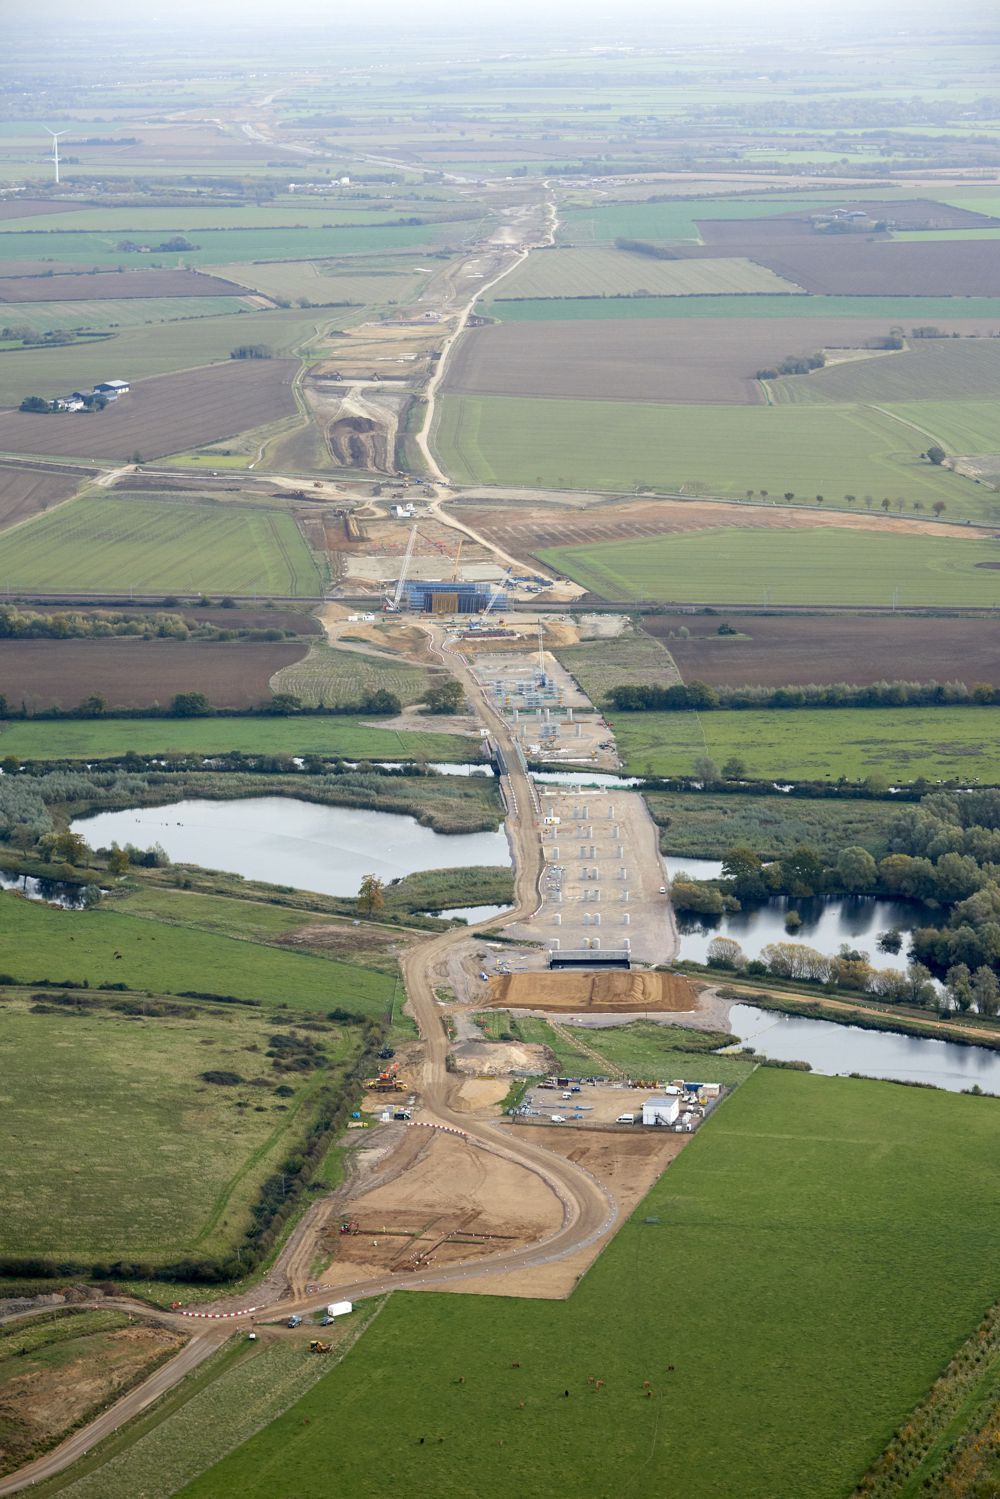 East of England: Three sites for the A14 Cambridge to Huntingdon road scheme (Swavesey, Brampton and Ermine Street – A1198 near Godmanchester) – A14 project talk, guided bus site tour and Q & A session.